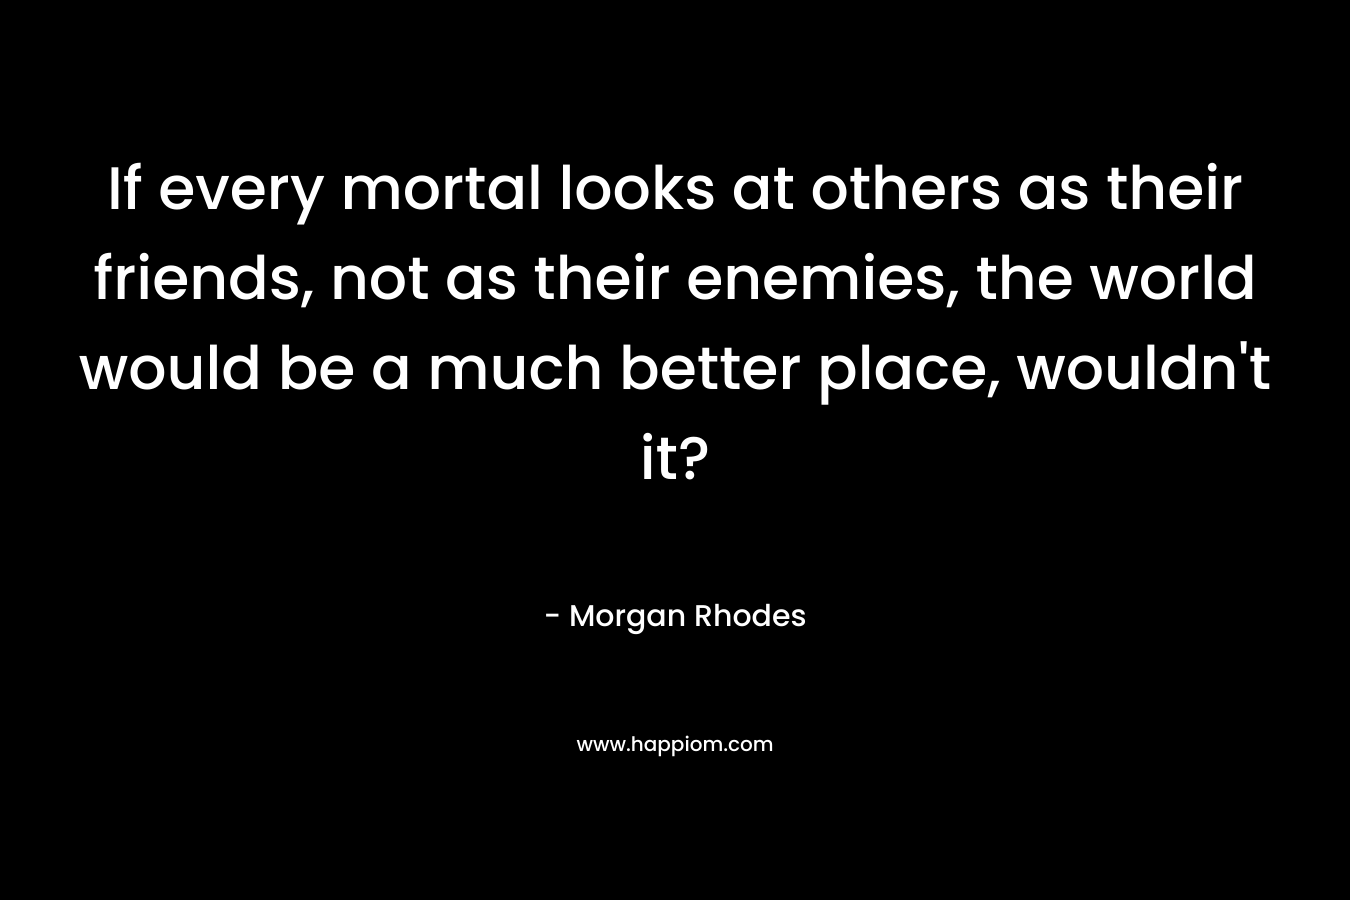 If every mortal looks at others as their friends, not as their enemies, the world would be a much better place, wouldn't it?